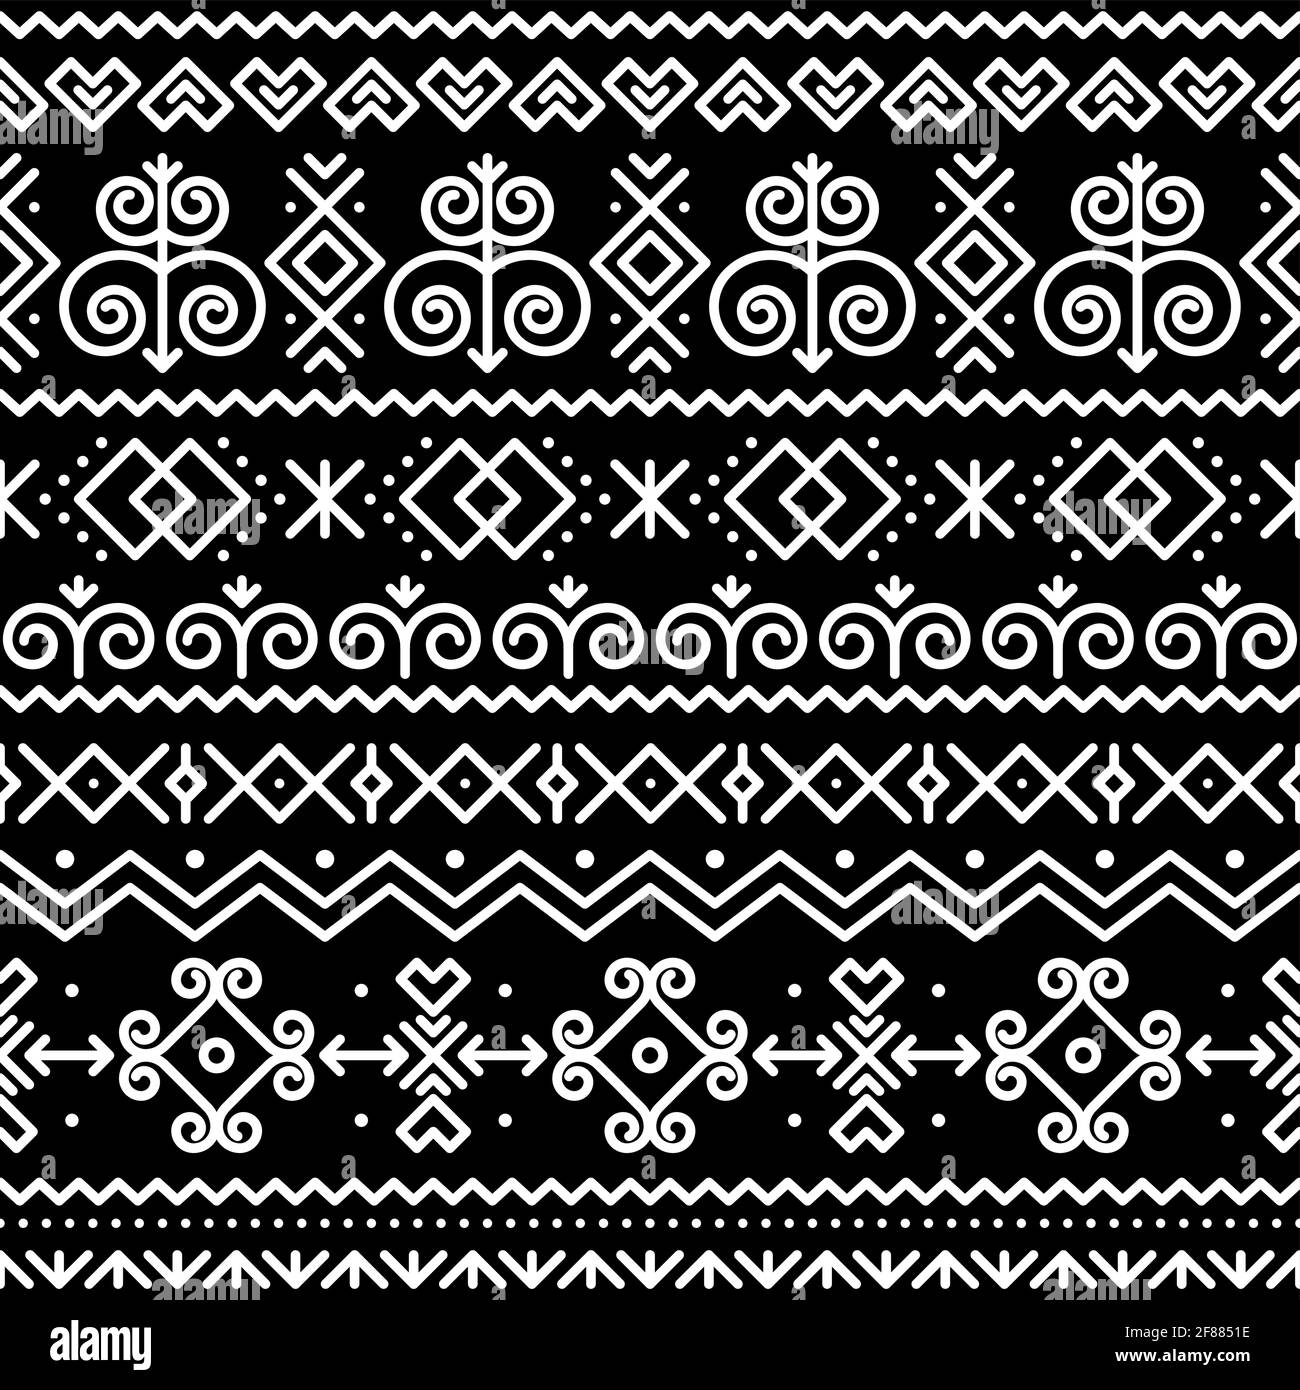 Slovak folk art vector seamless pattern with abstract geometric shapes inspired by traditional house paintings from village Cicmany in Zilina region, Stock Vector